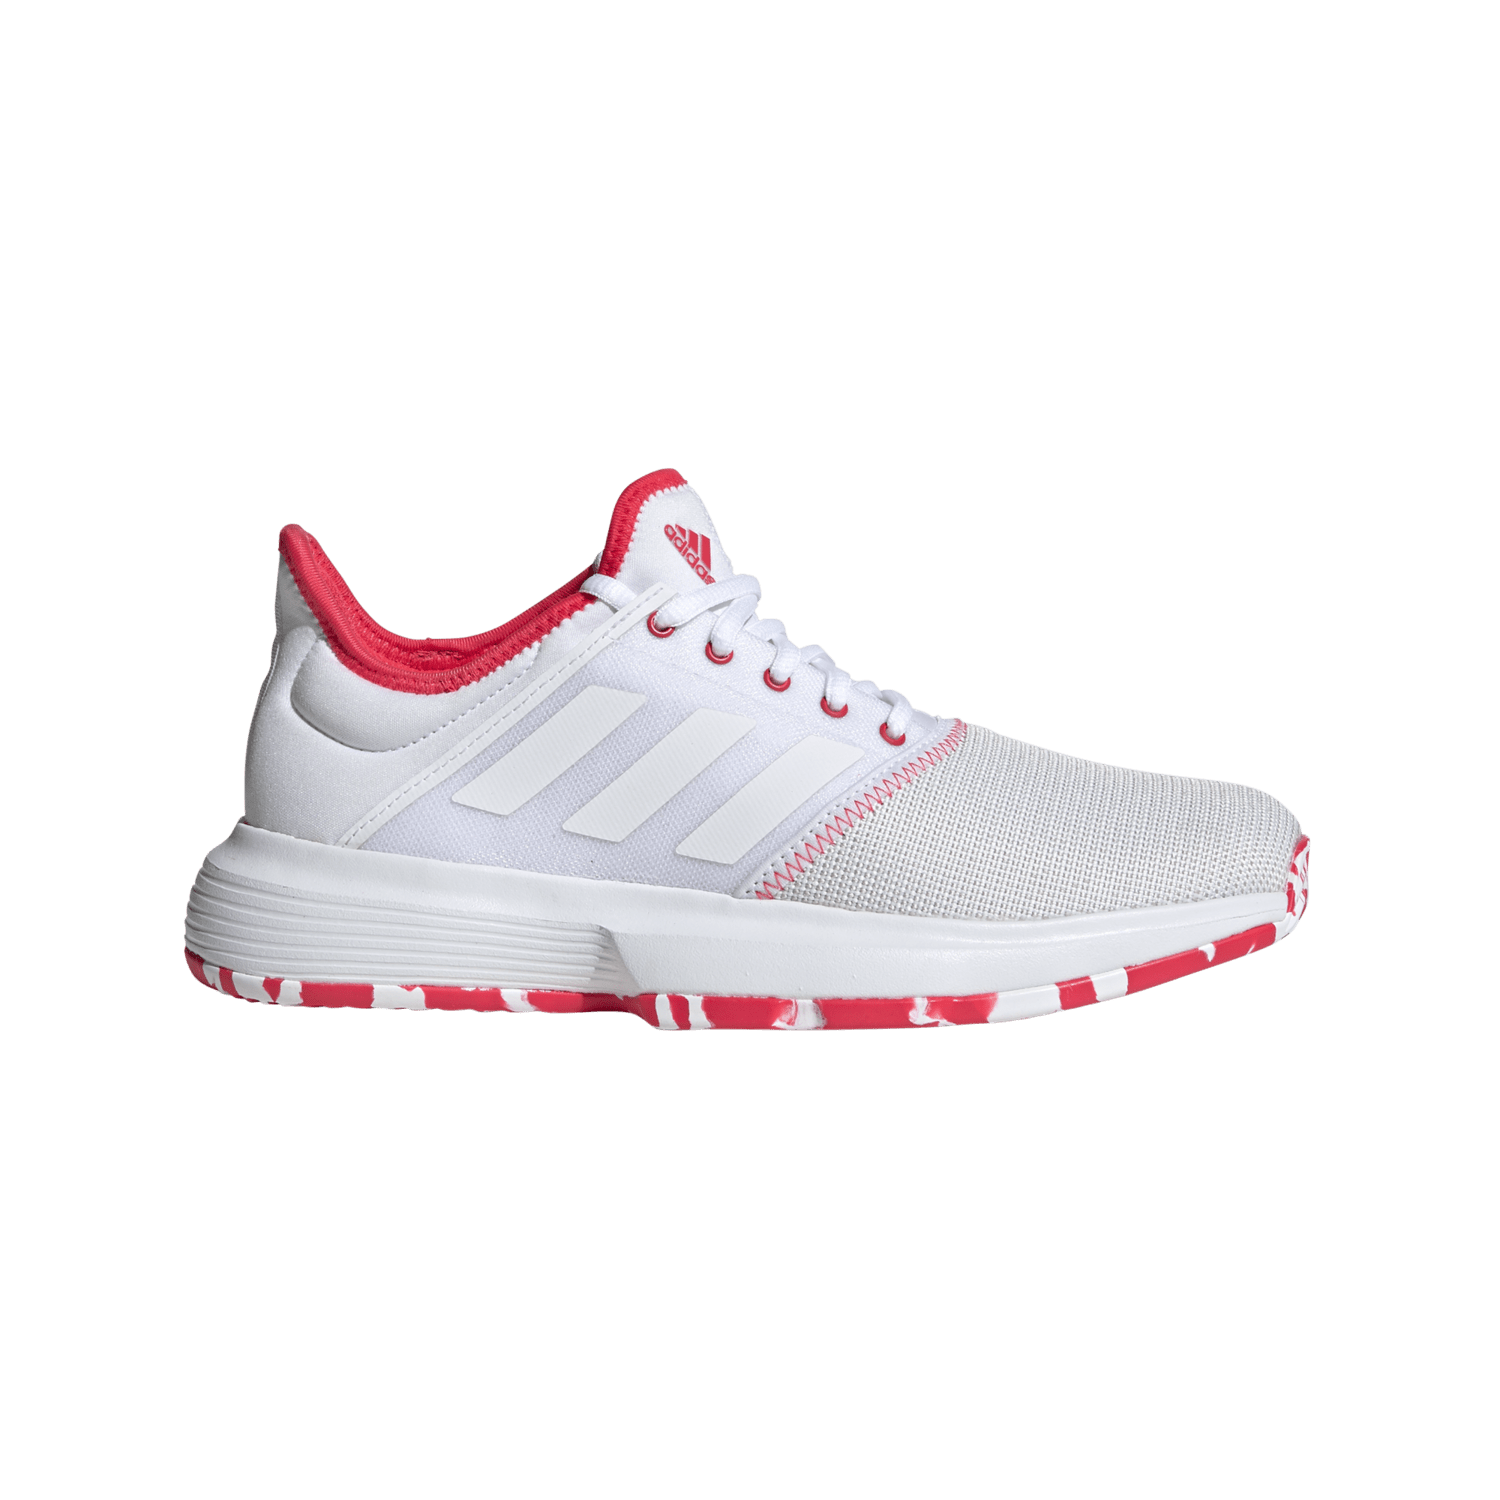 red and white tennis shoes